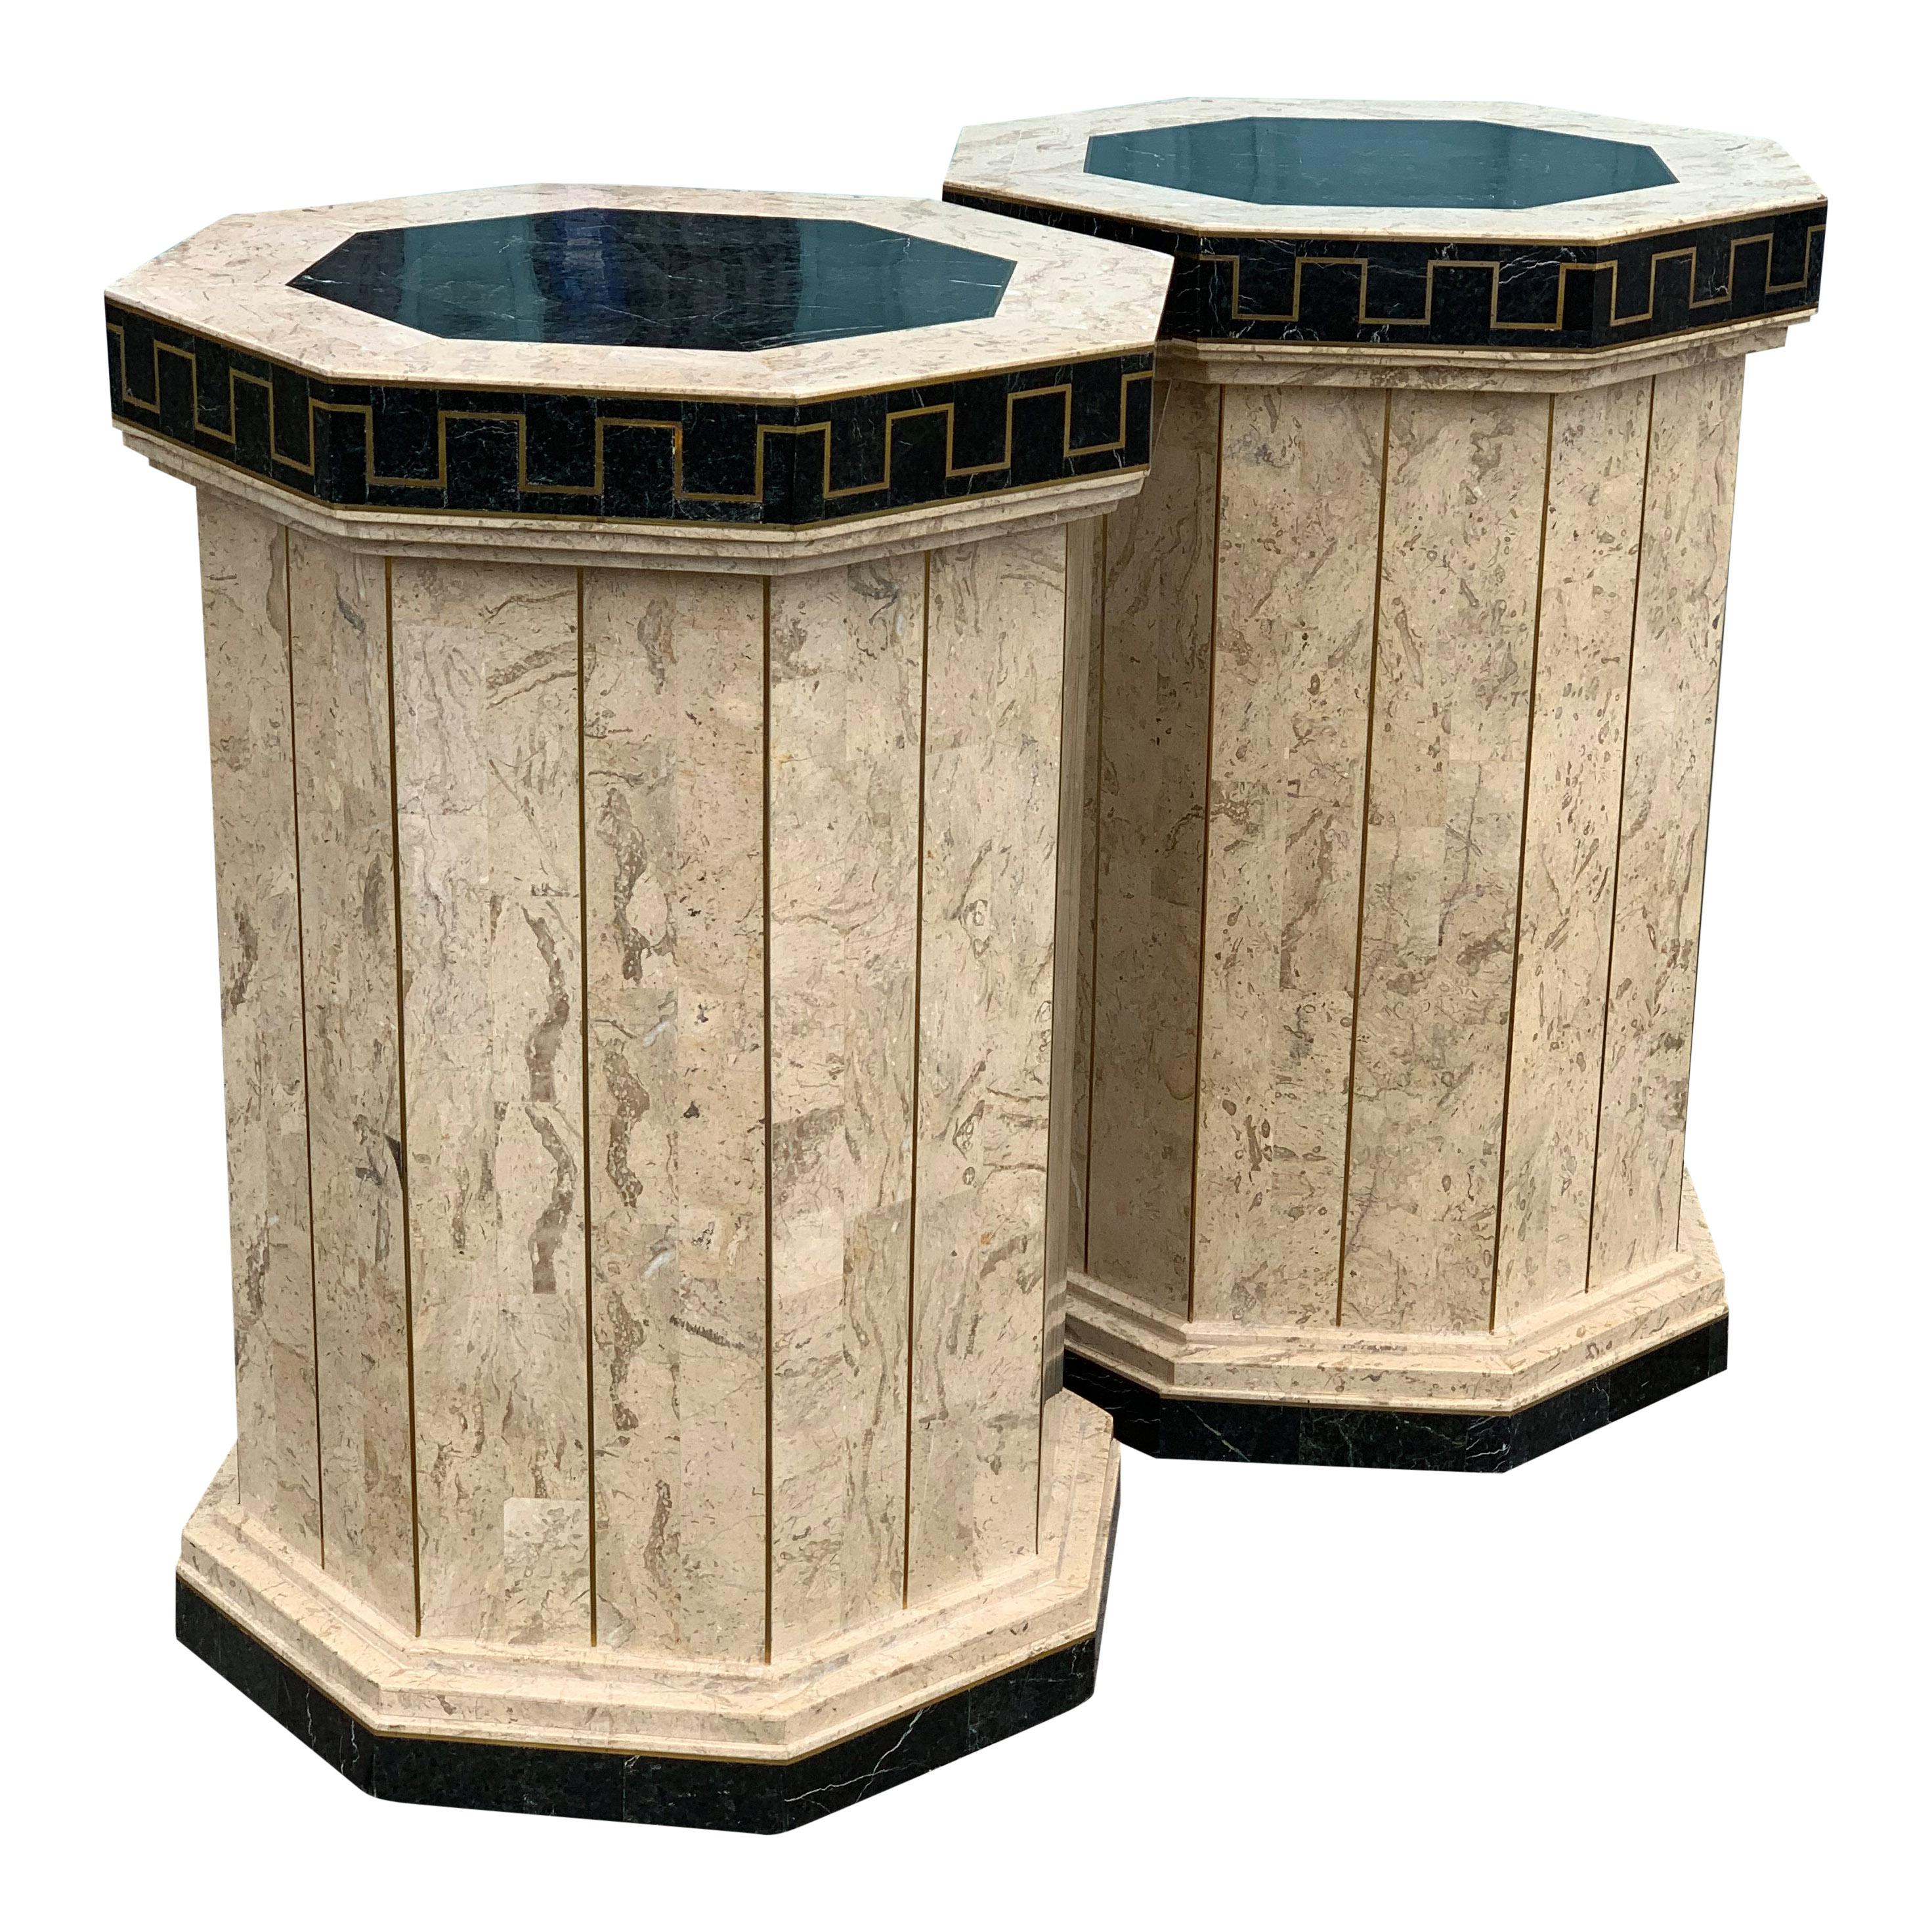 A pair of Hollywood Regency, Maitland and Smith pedestals, veneered Travertine and marble and a thick brass inlay decorated with a Versace Greek key border.

Also have a very similar Maitland and Smith console table in stock.